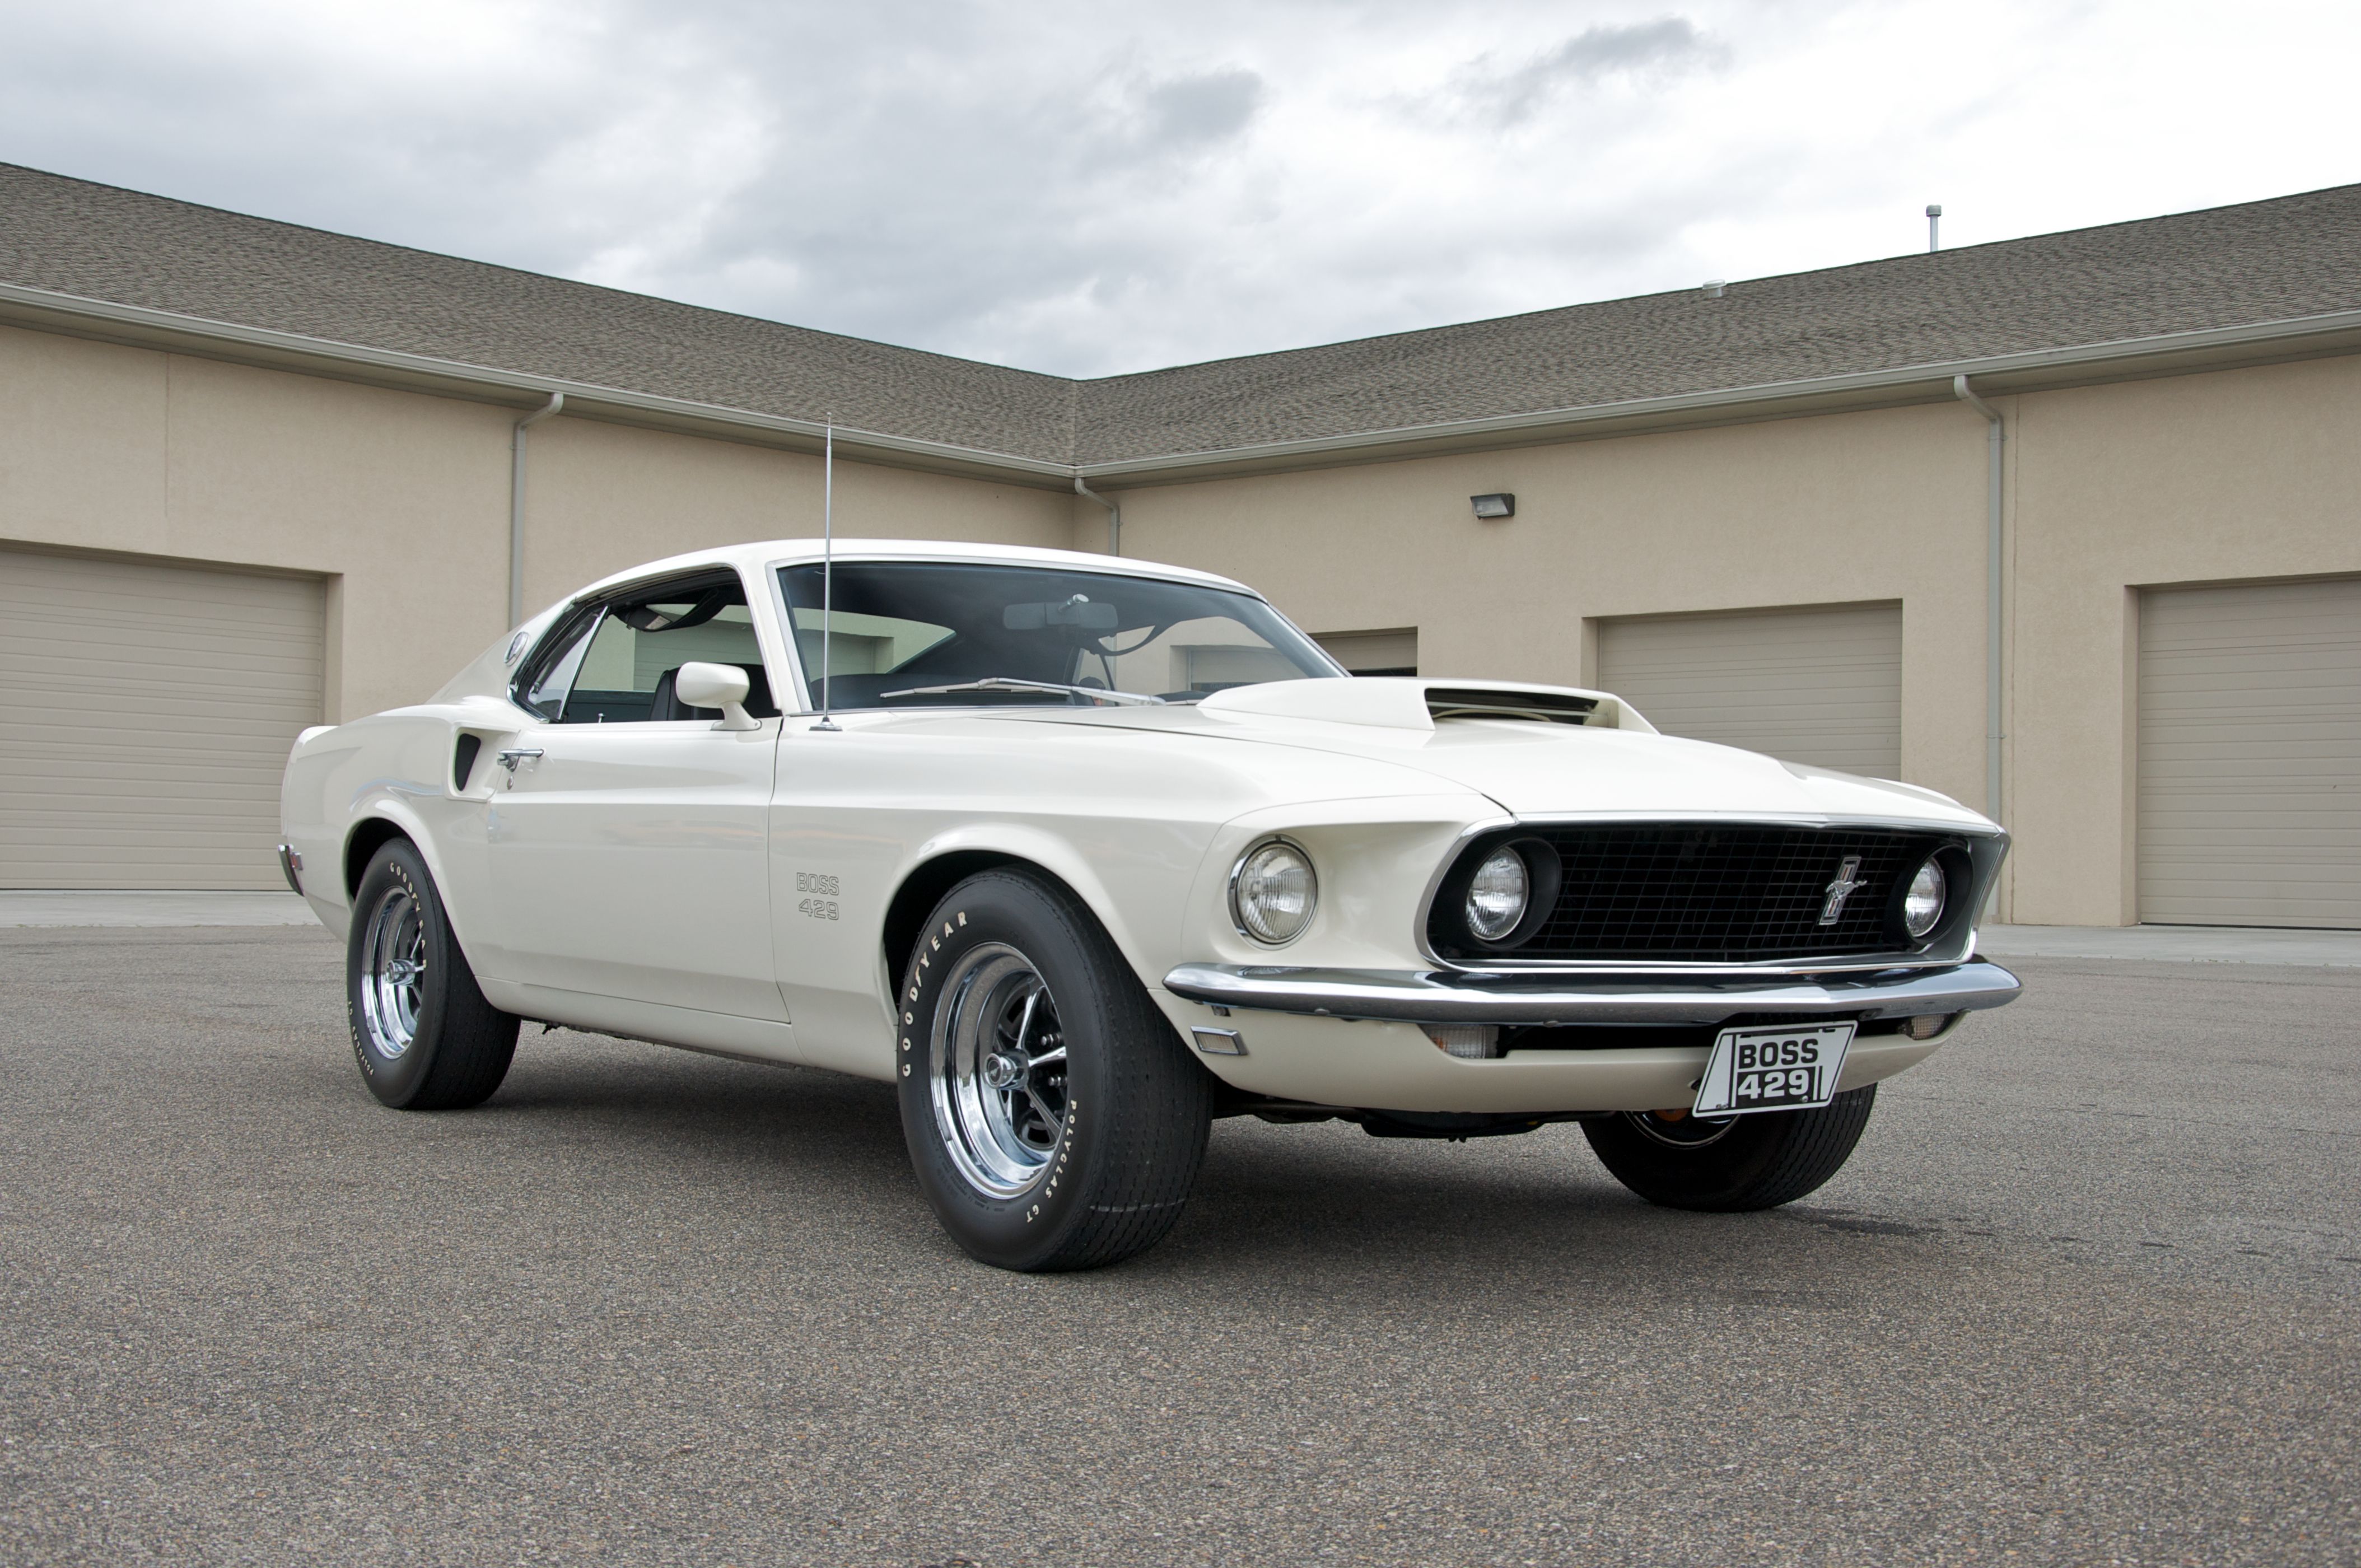 Car Fastback Ford Mustang Boss 429 Muscle Car White Car 4216x2800